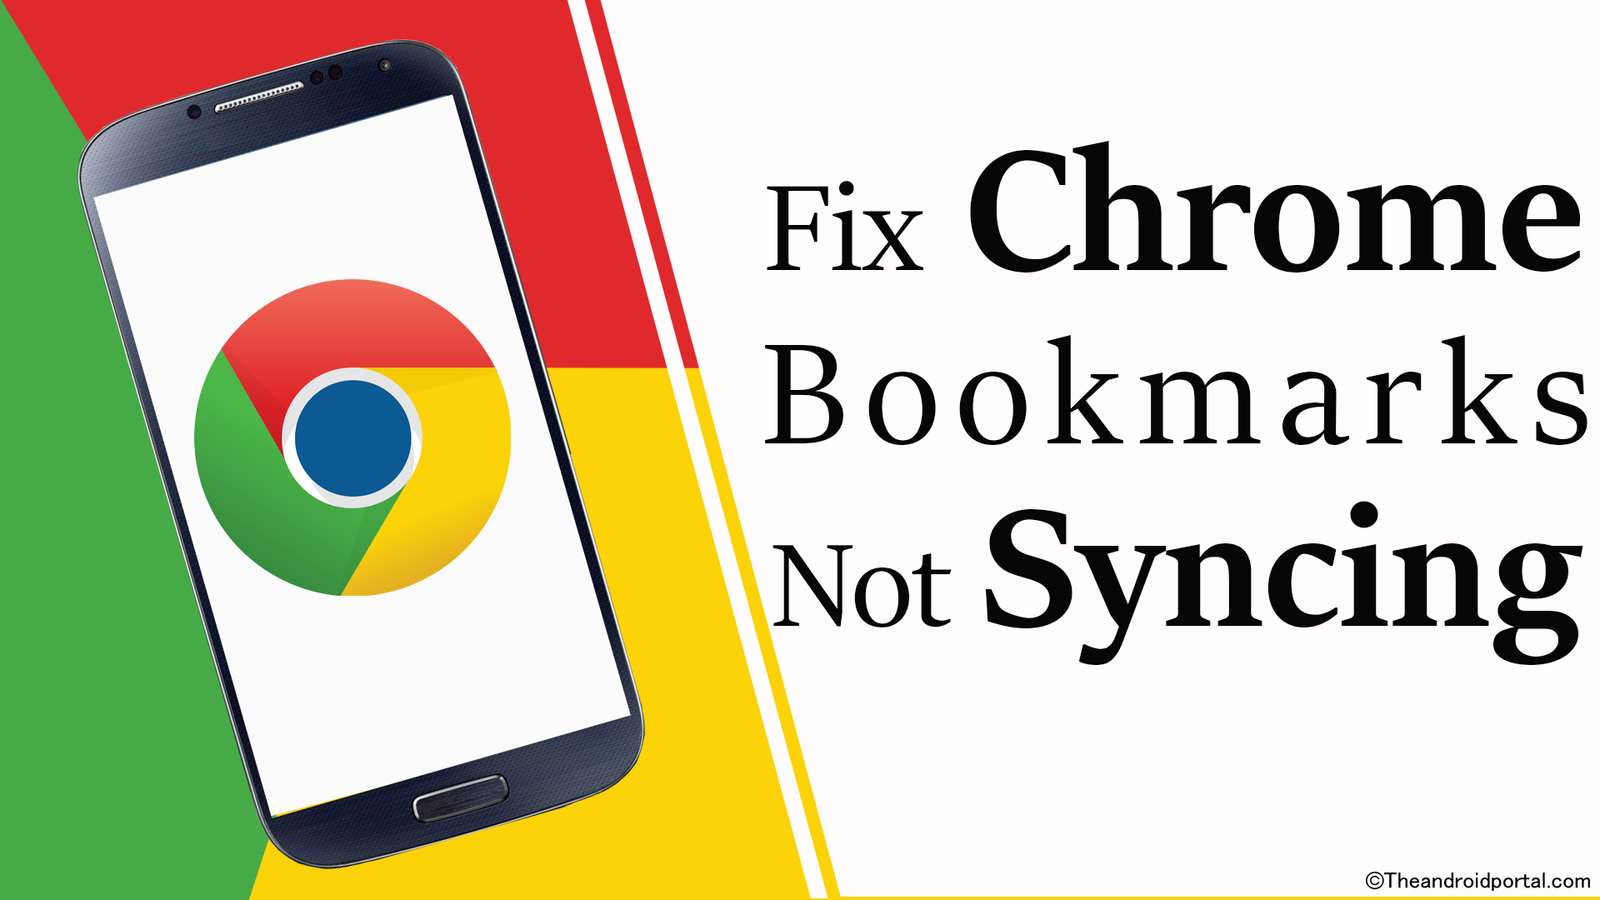 Fix Chrome Bookmarks Not Syncing on Android - theandroidportal.com